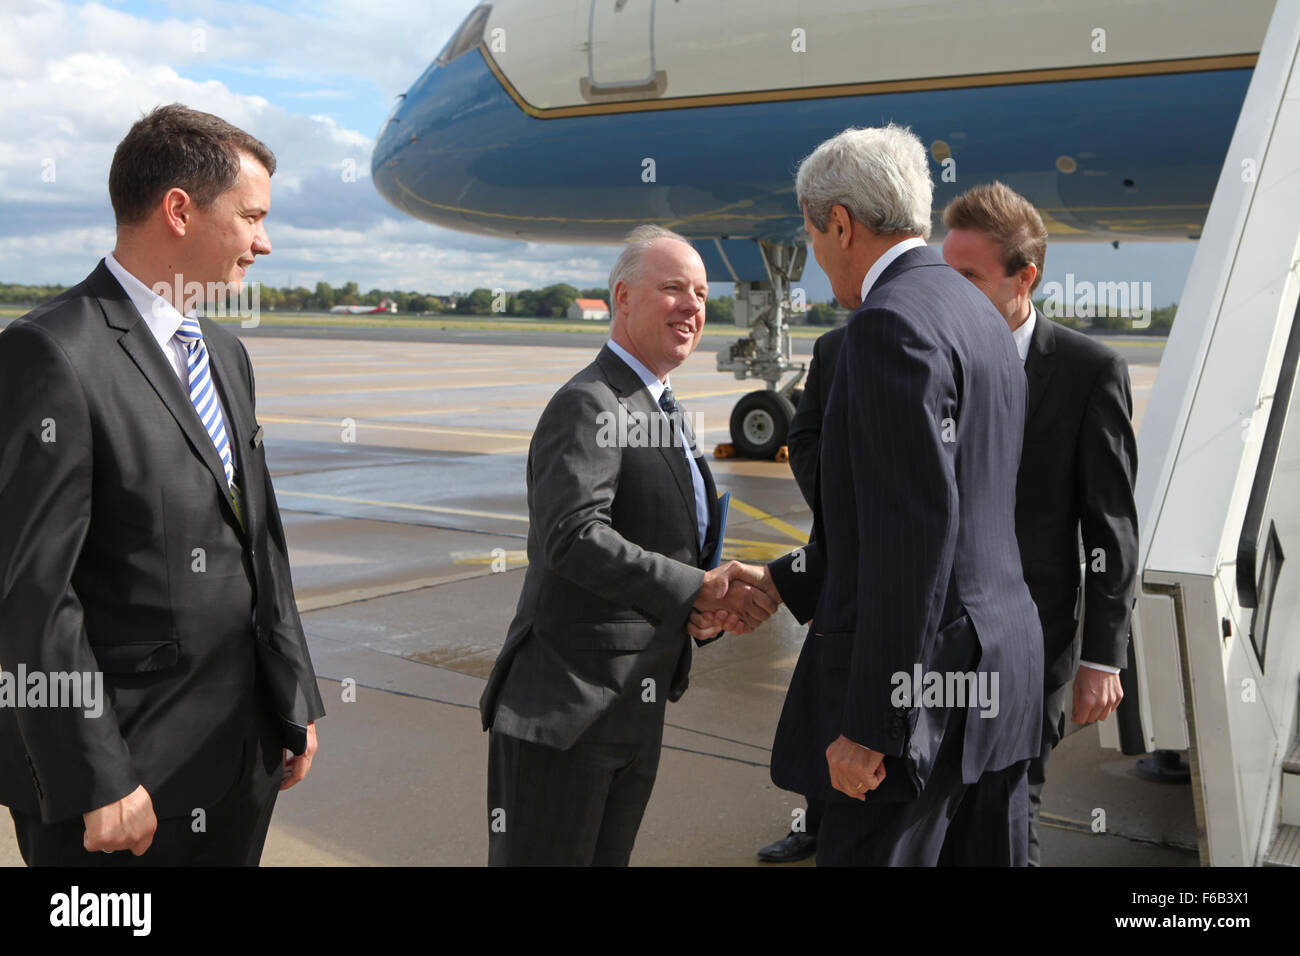 Secretary Kerry is Greeted by the Head Ofgerman Protocol and Embassy Charge d'affaires Upon Arrival in Berlin, Germany Stock Photo